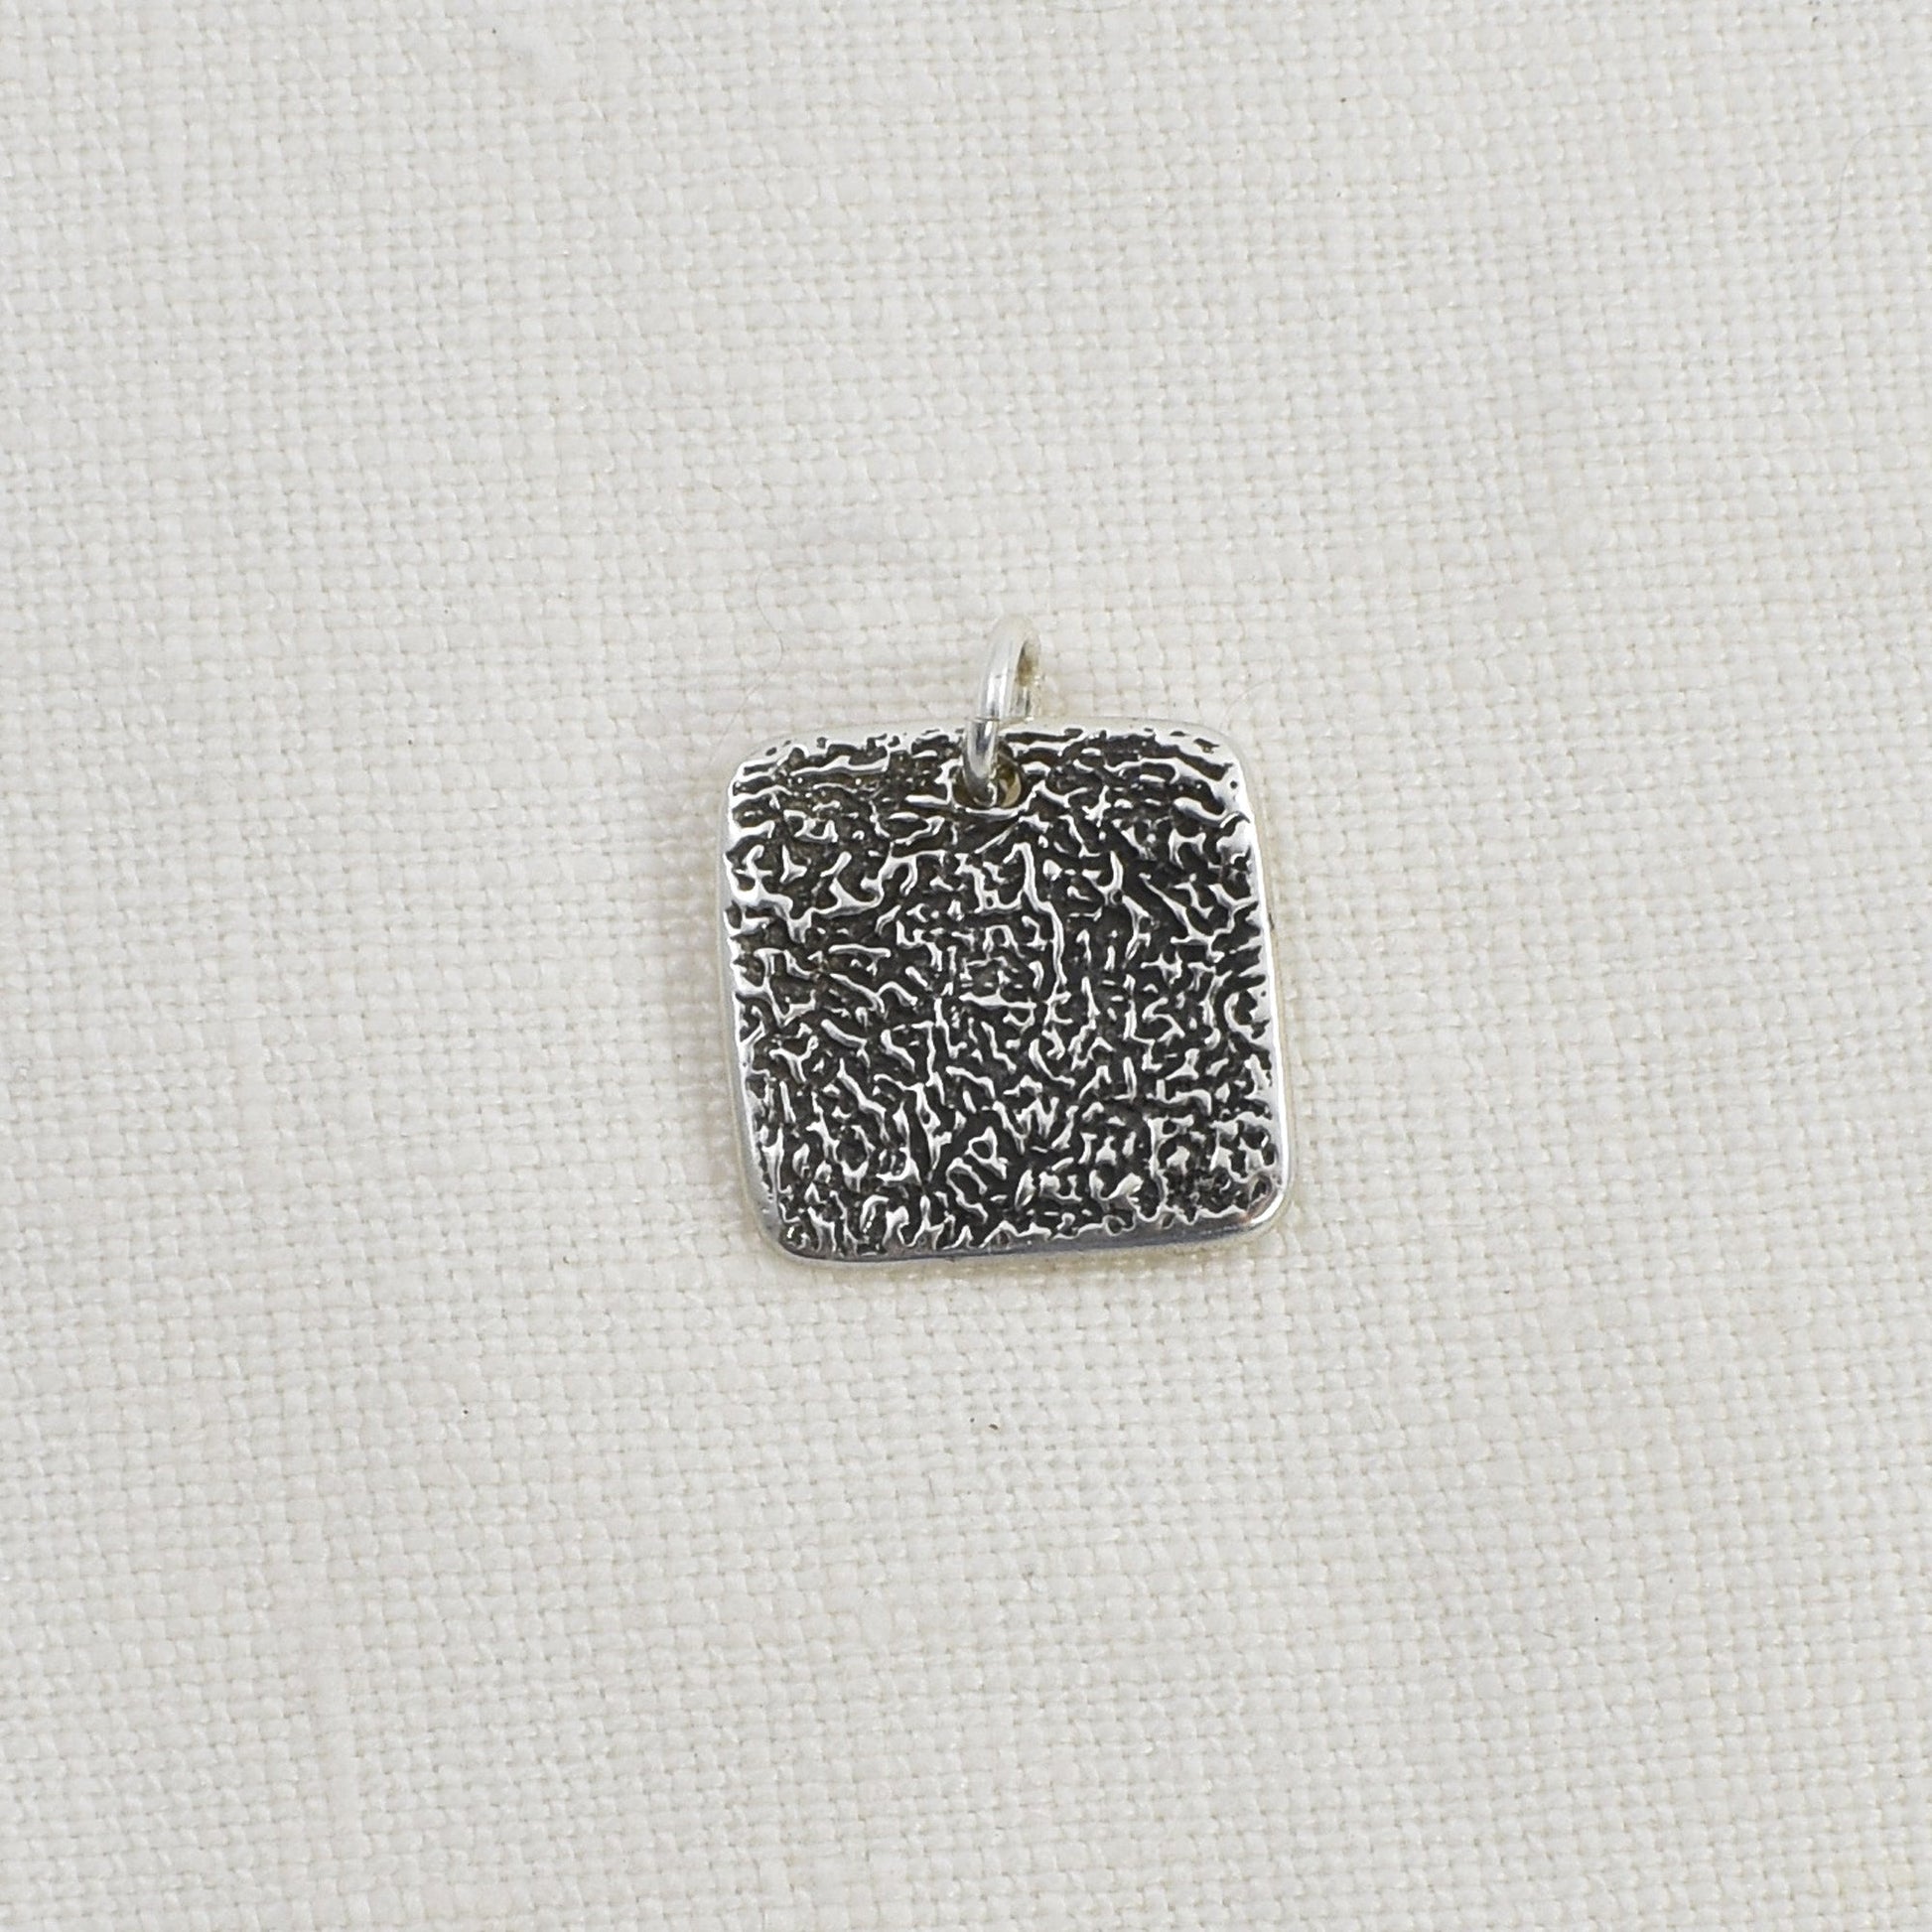 Dog Nose Textured Square Pendant shown as an example of a textured pendant with black patina